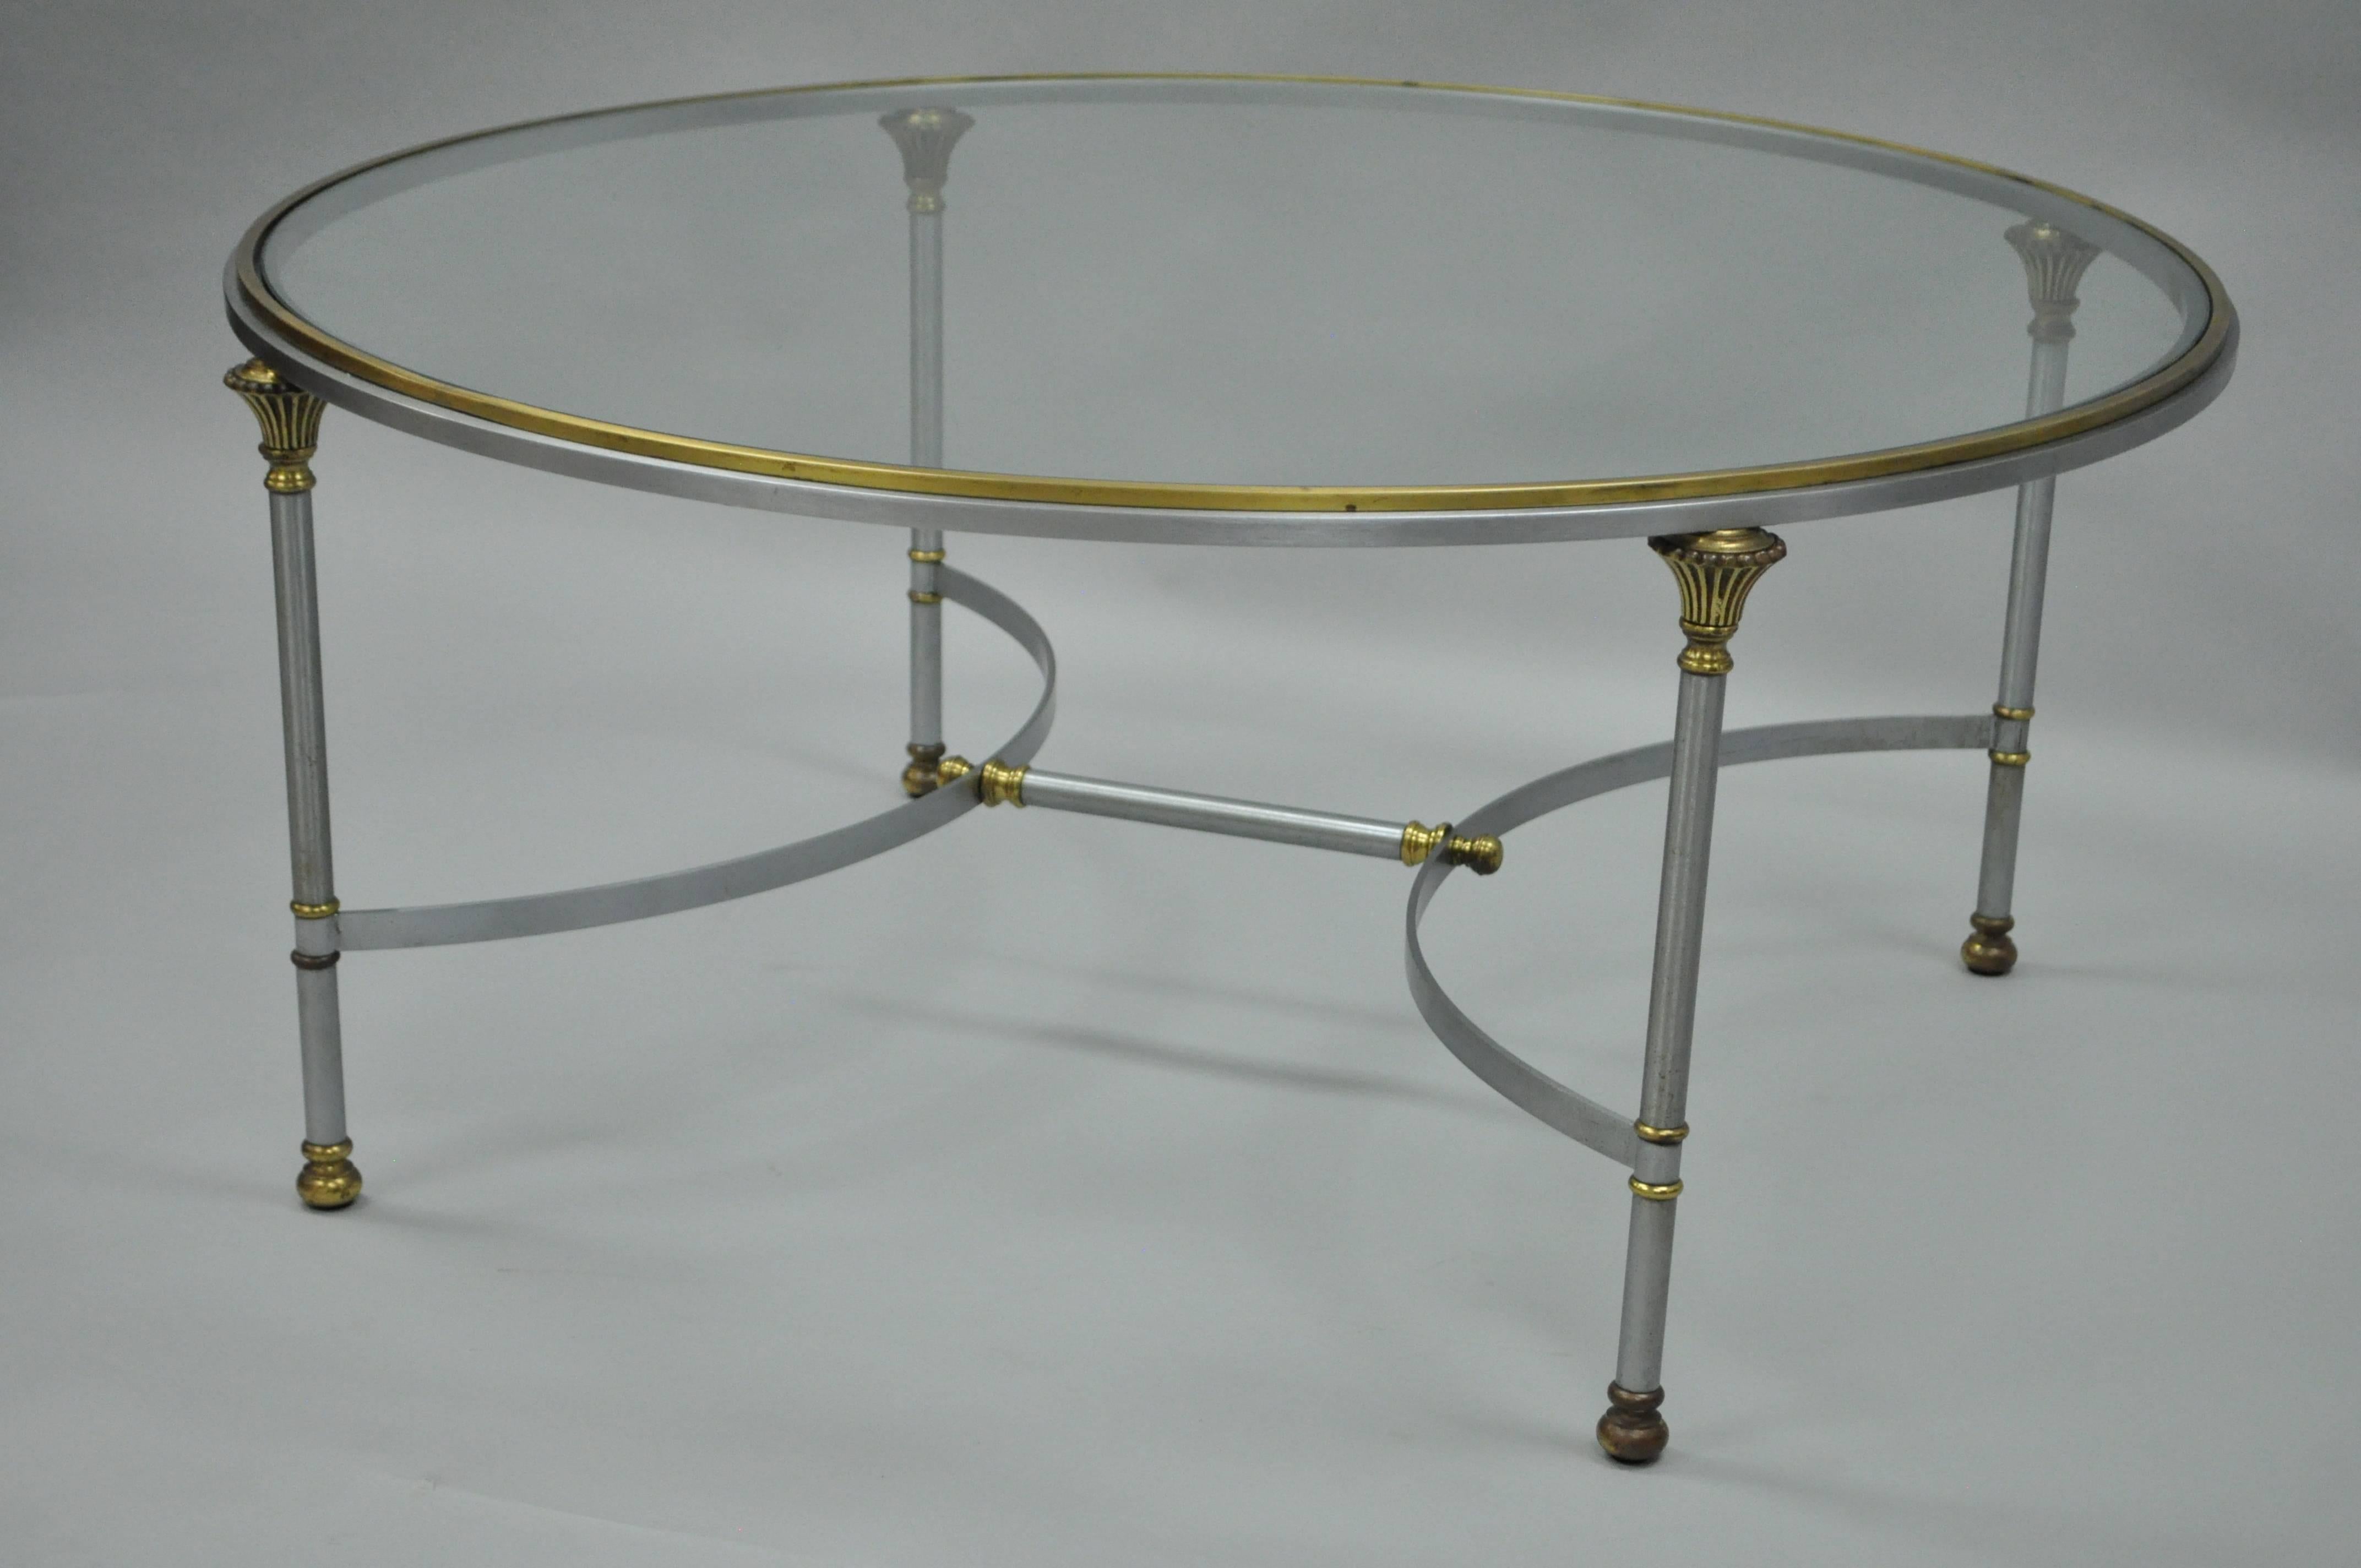 Elegant vintage Italian brushed steel and brass round cocktail table in the manner of Maison Jansen. Item features a round form with solid brass gallery, inset glass top, brushed steel stretcher supported frame, brass accents and quintessential